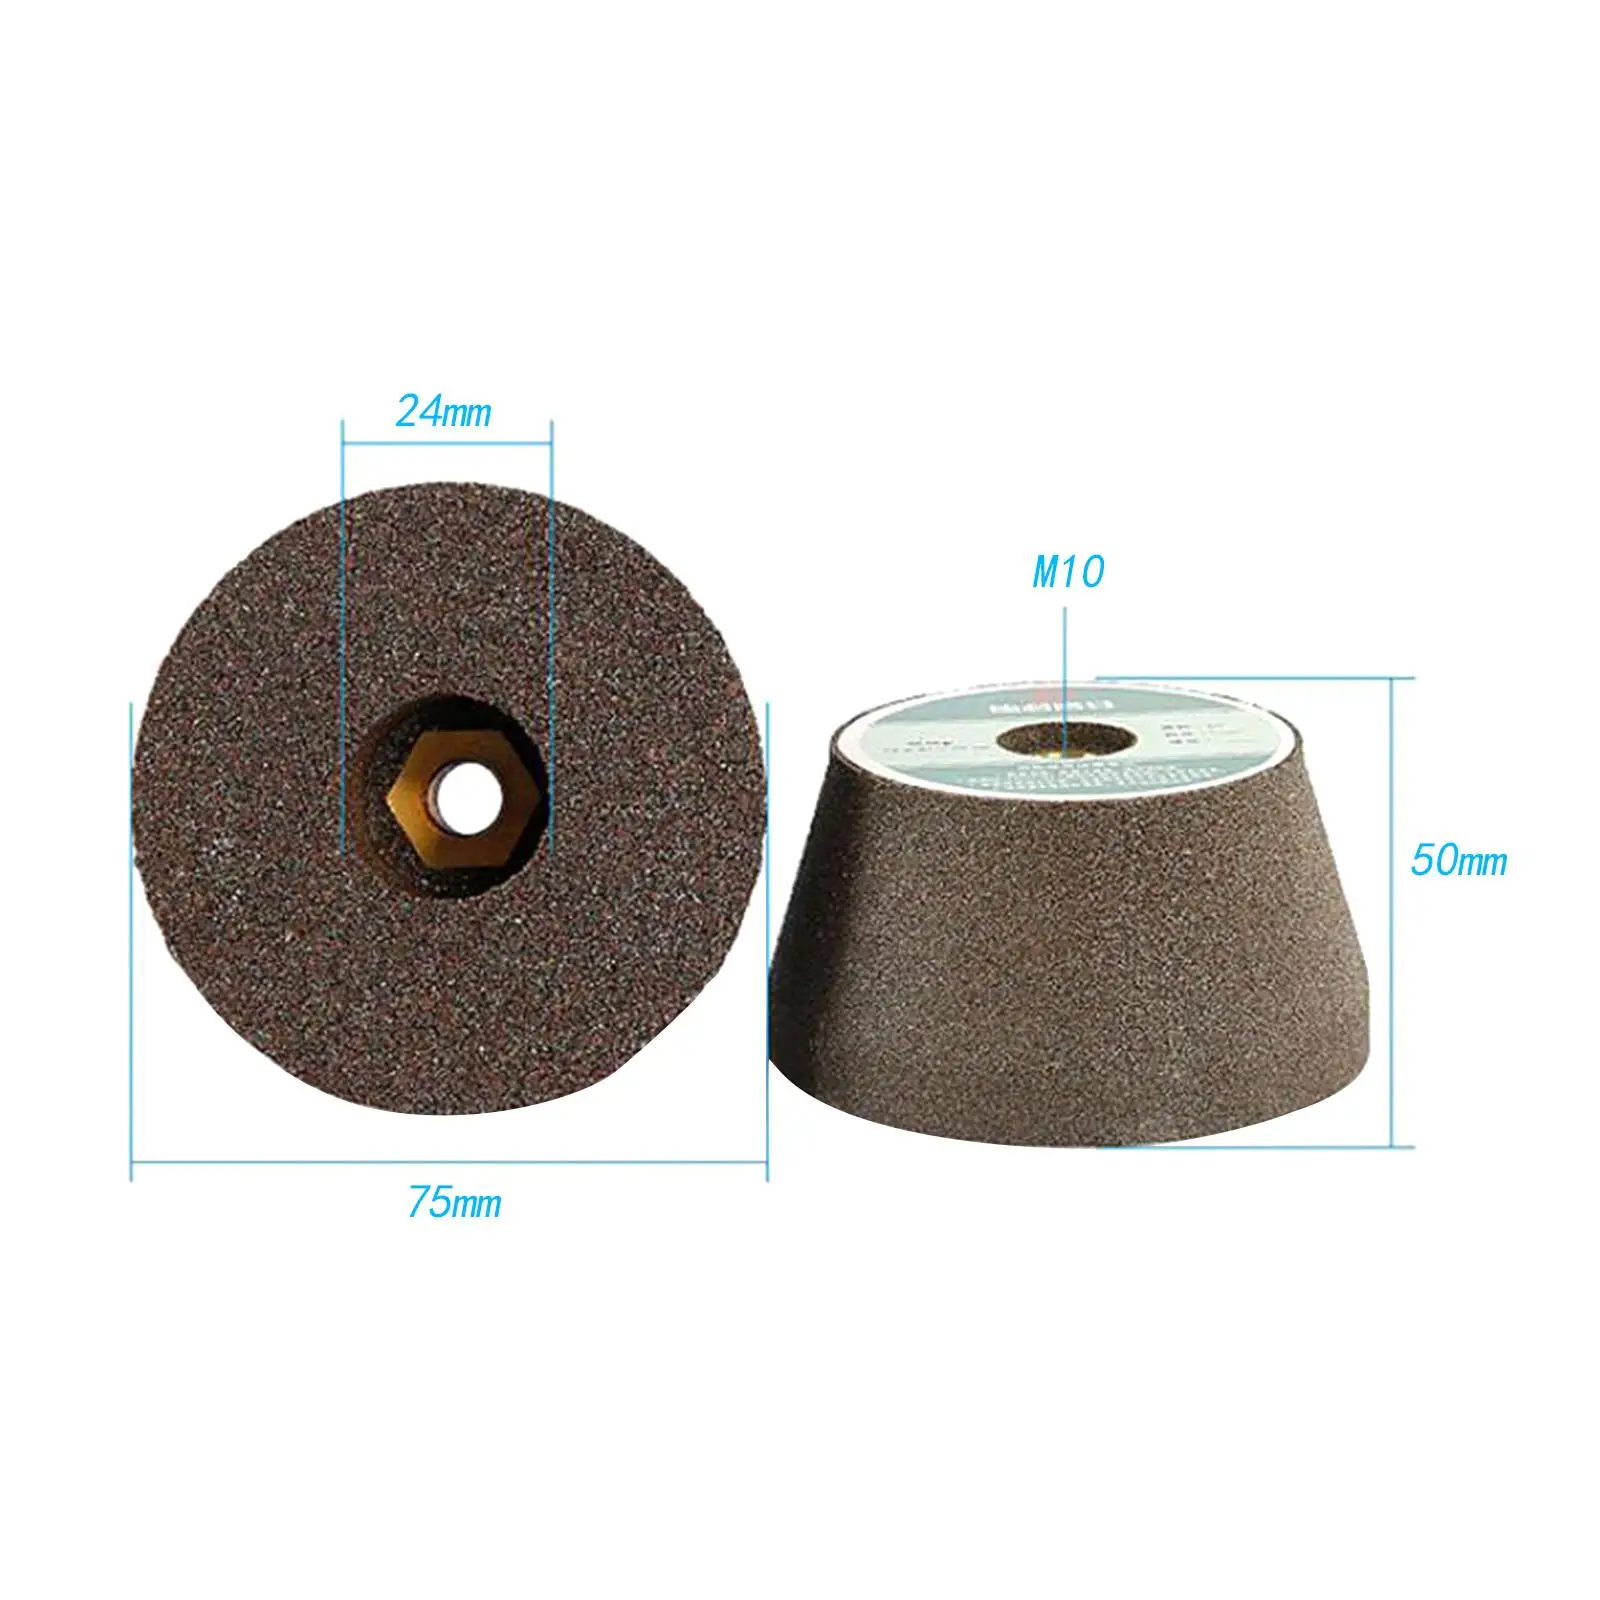 Flaring Cup Wheel Attachment Abrasiver Rotary Tool Grinding Wheel for M10 Angle Grinder Bench Grinder Shaping Stone Granite